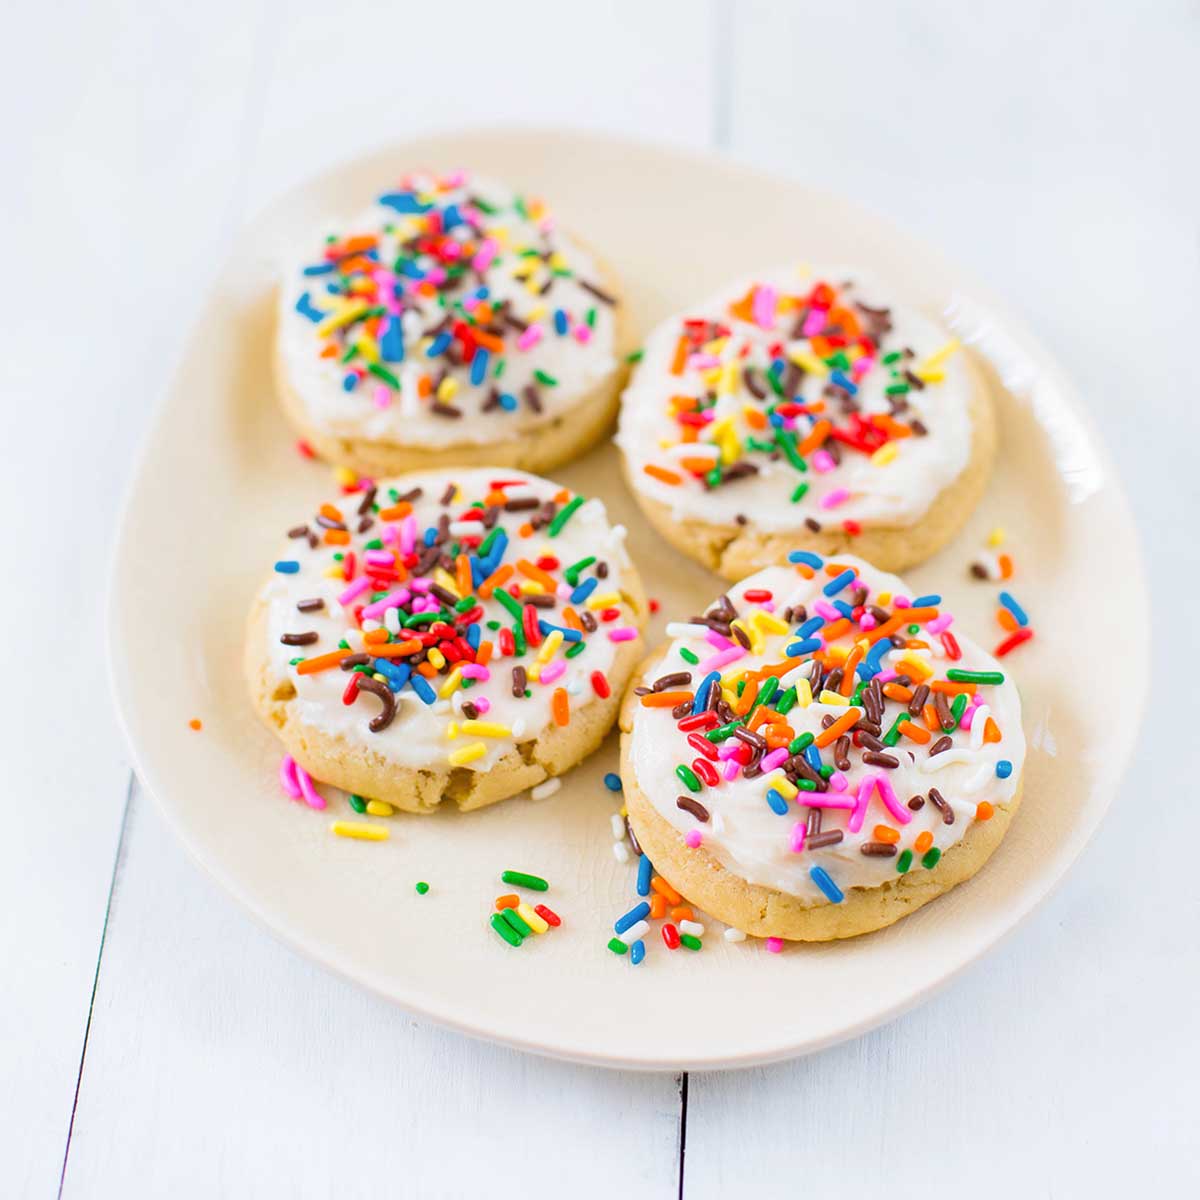 Four sugar cookies with frosting and sprinkles on a cream colored plate.